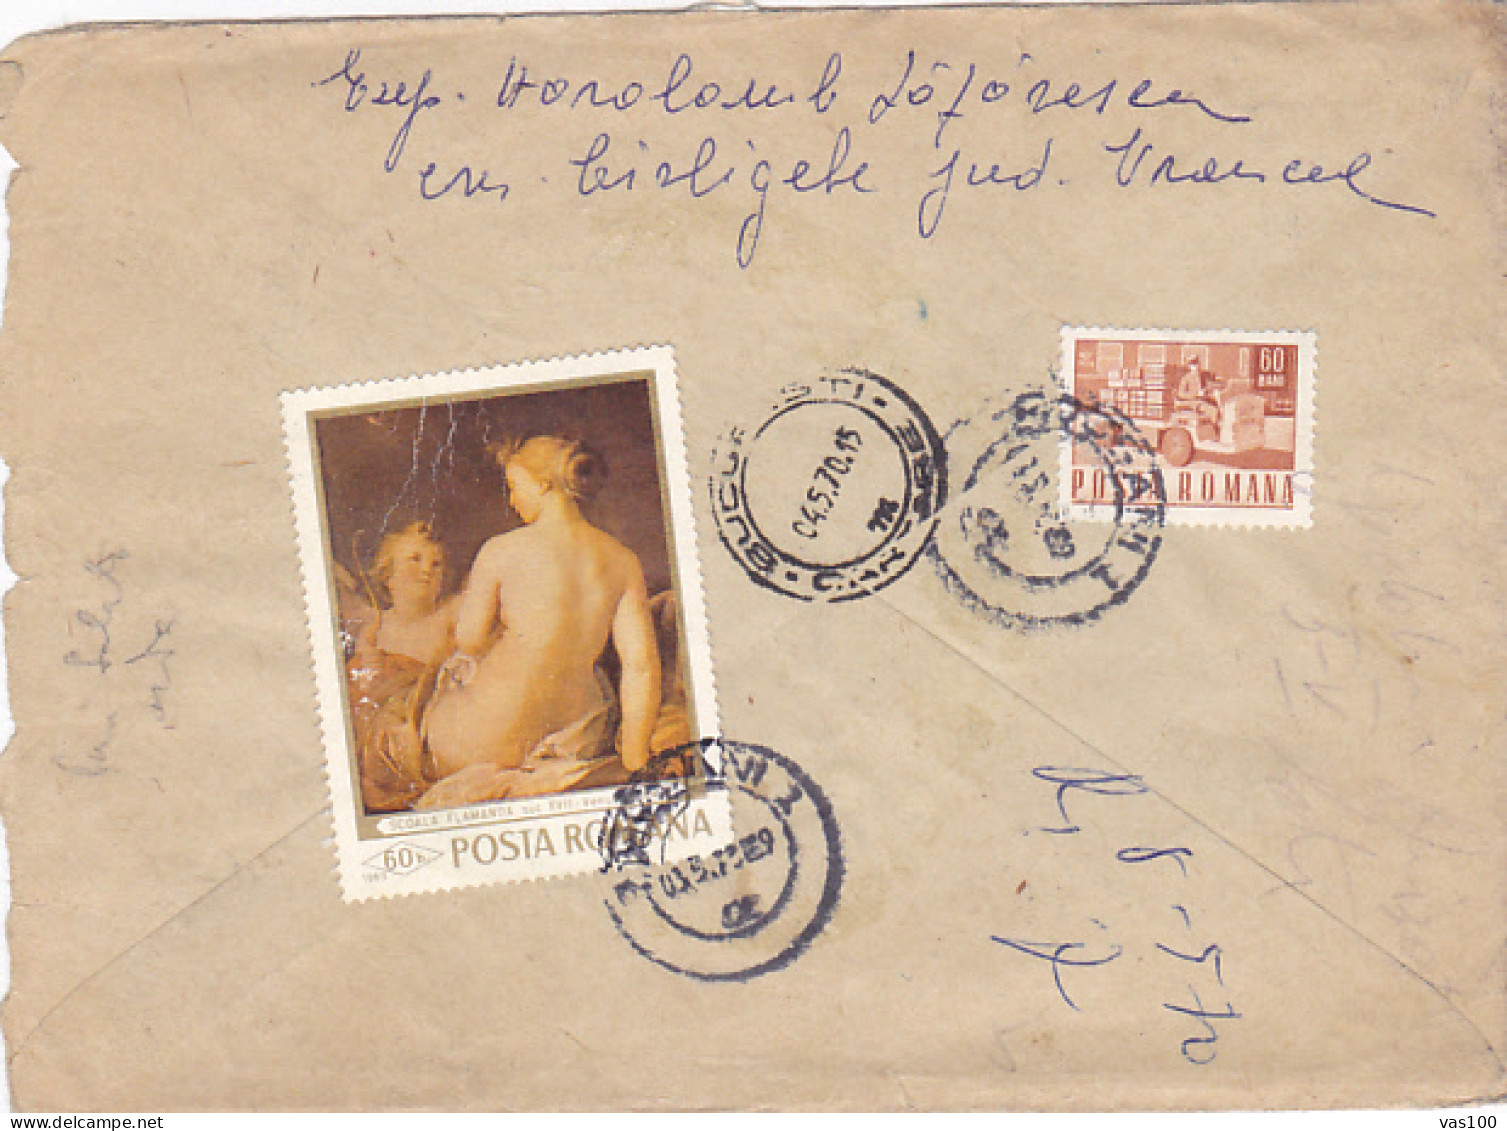 TRAIN, PLANE, POST, NUDE PAINTING, STAMPS ON REGISTERED COVER, 1970, ROMANIA - Covers & Documents